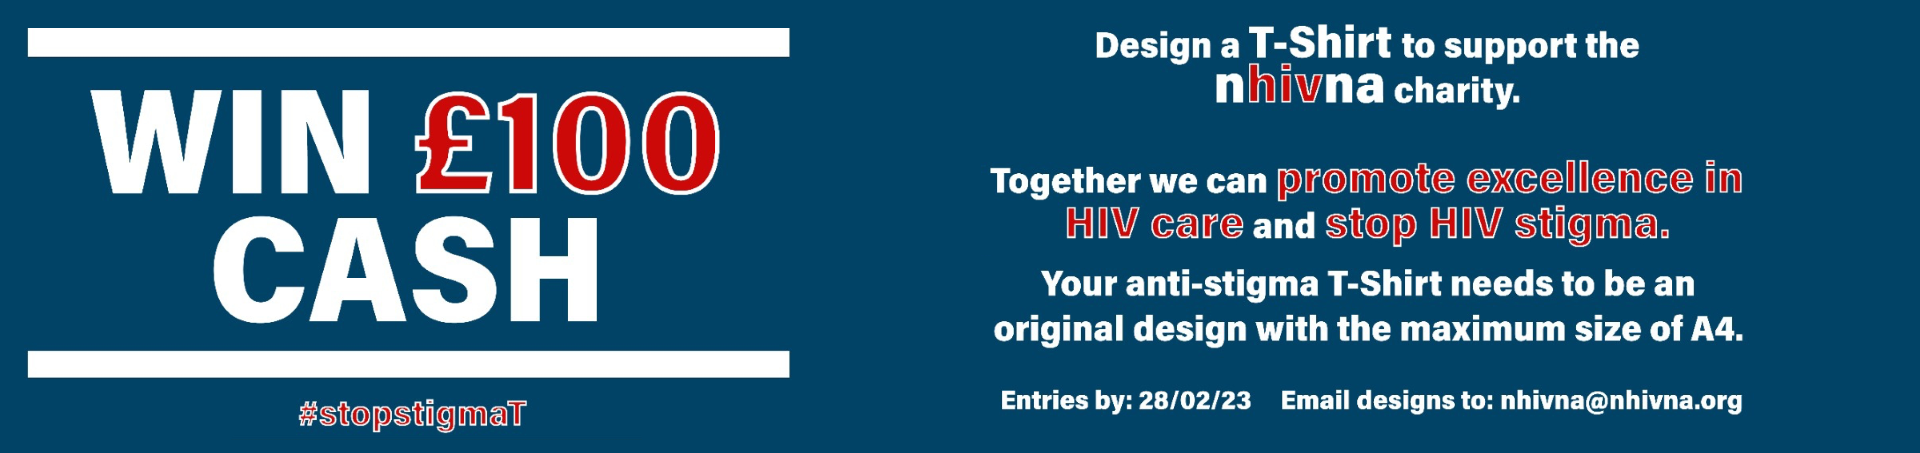 Design a T-Shirt to support NHIVNA